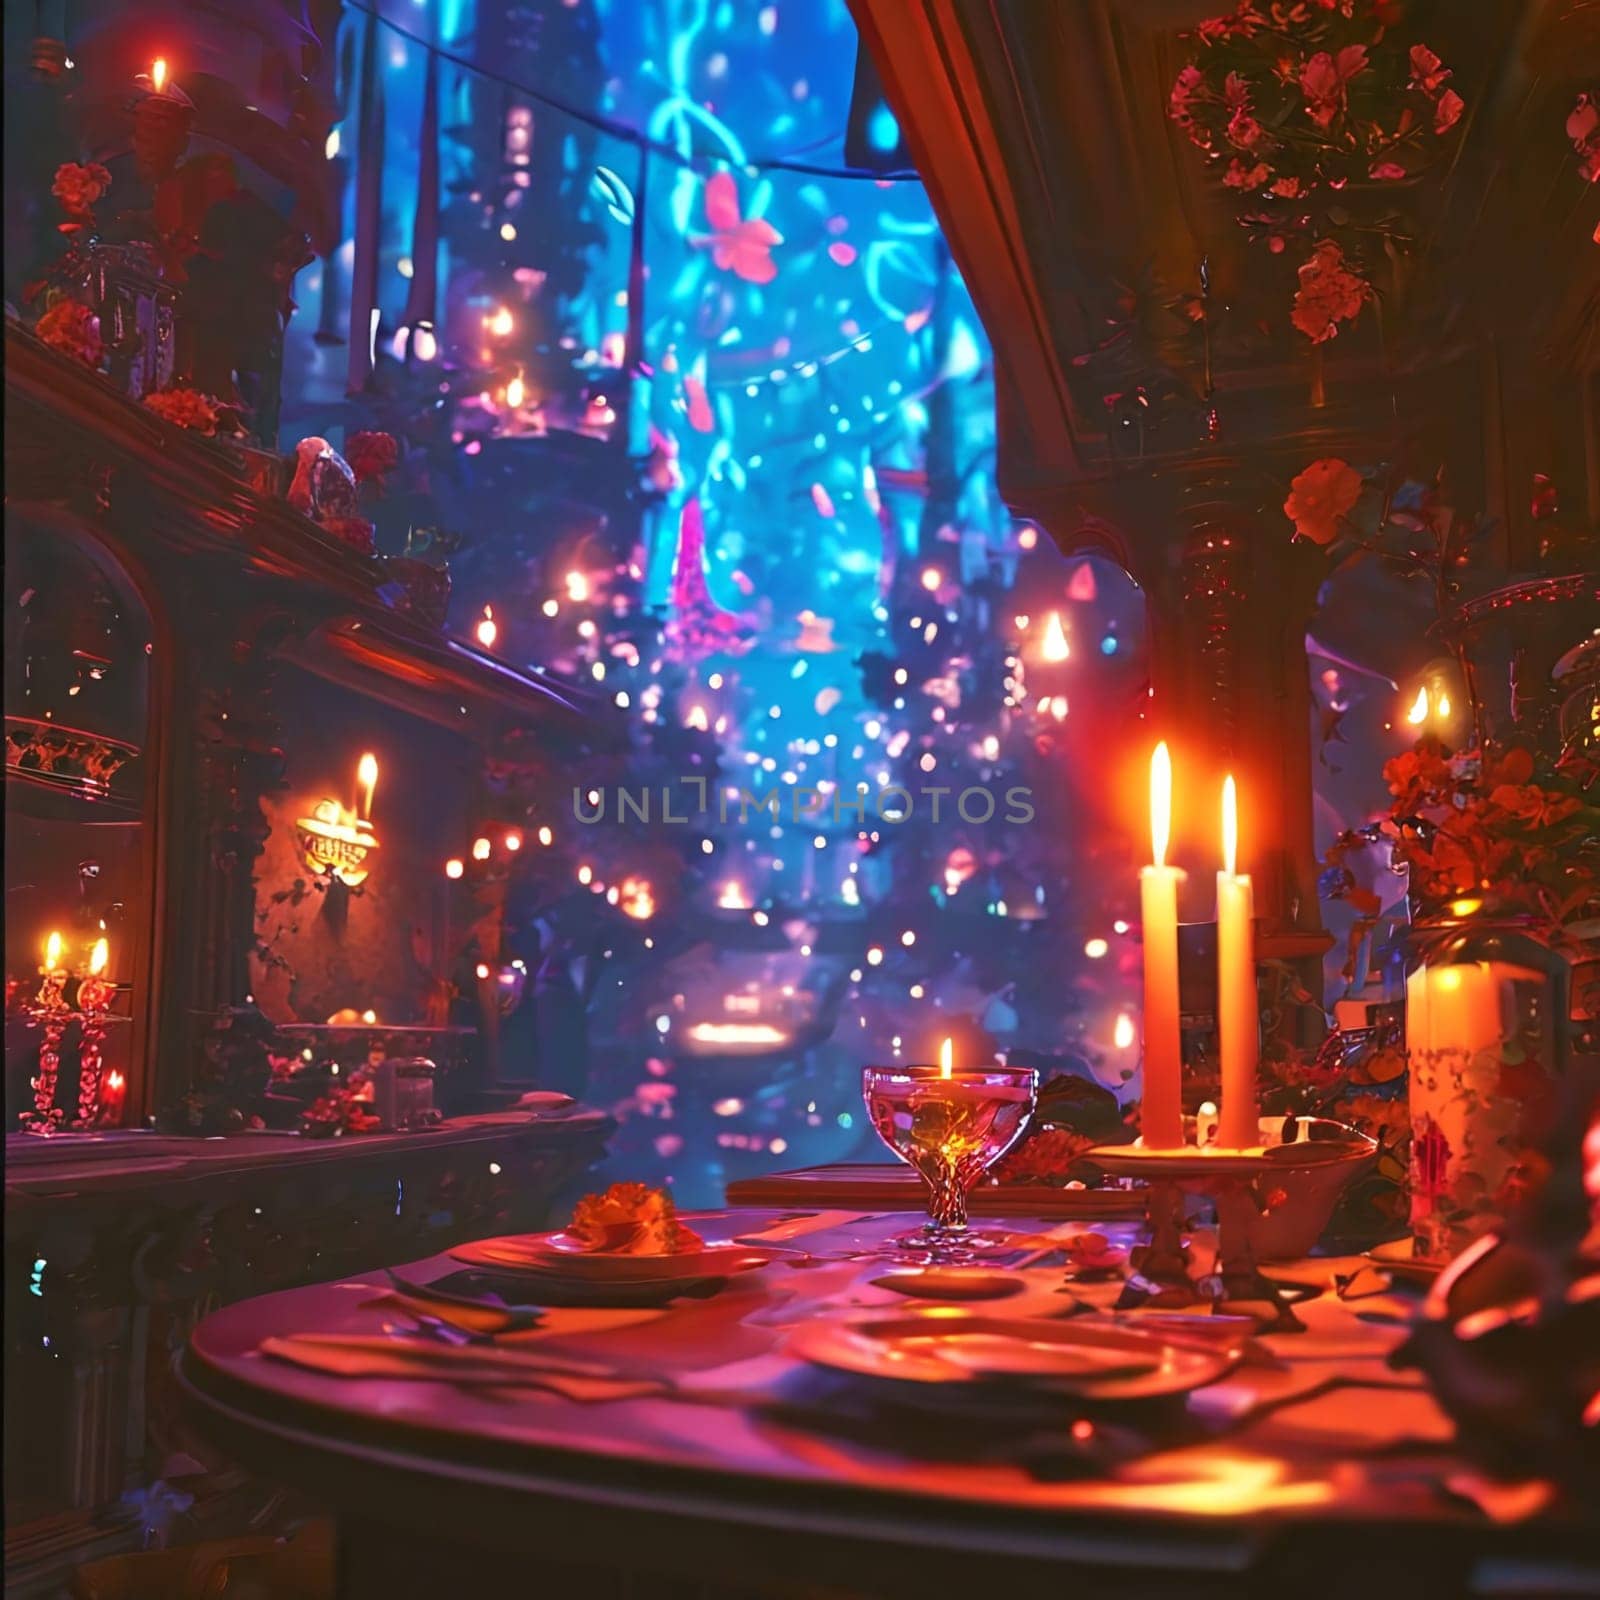 Romantic Candlelight Dinner for Two Lovers Concept Horizontal. High quality photo